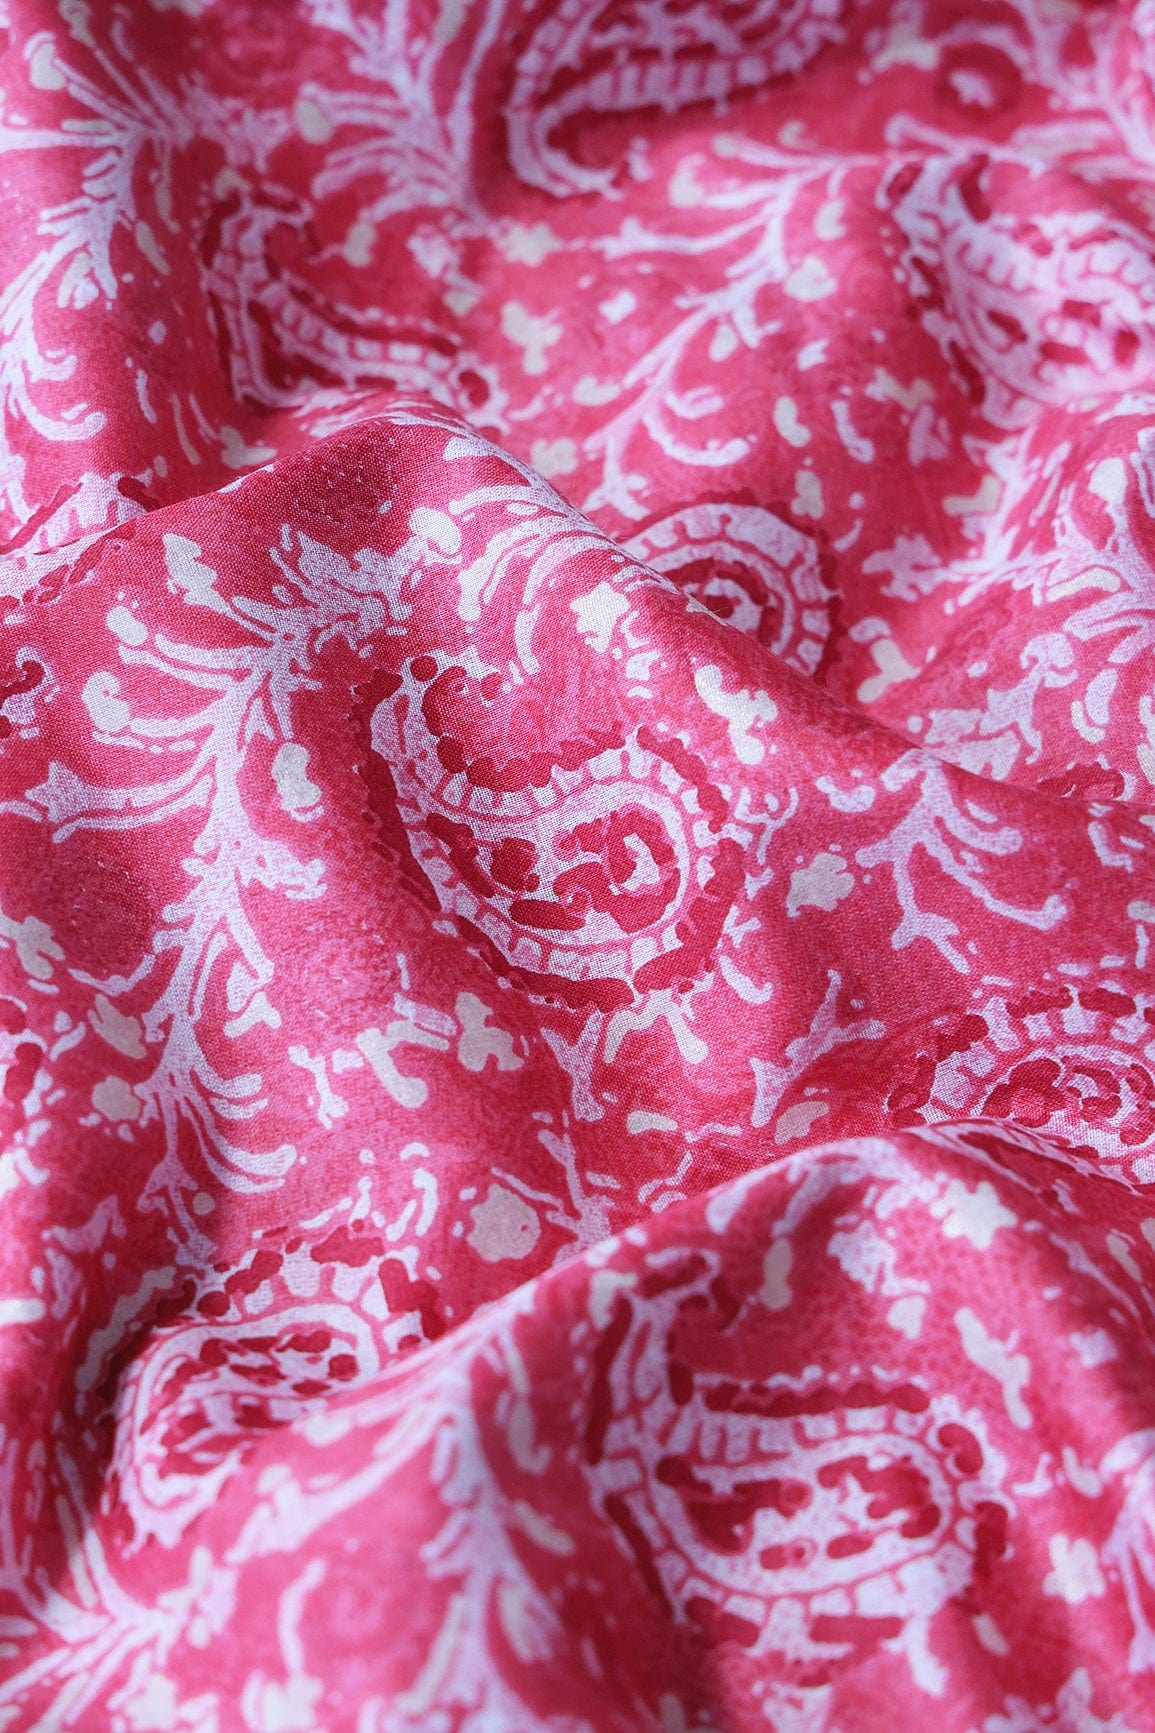 doeraa Prints Pink Paisley Pattern With Foil Print On Pure Mul Cotton Fabric